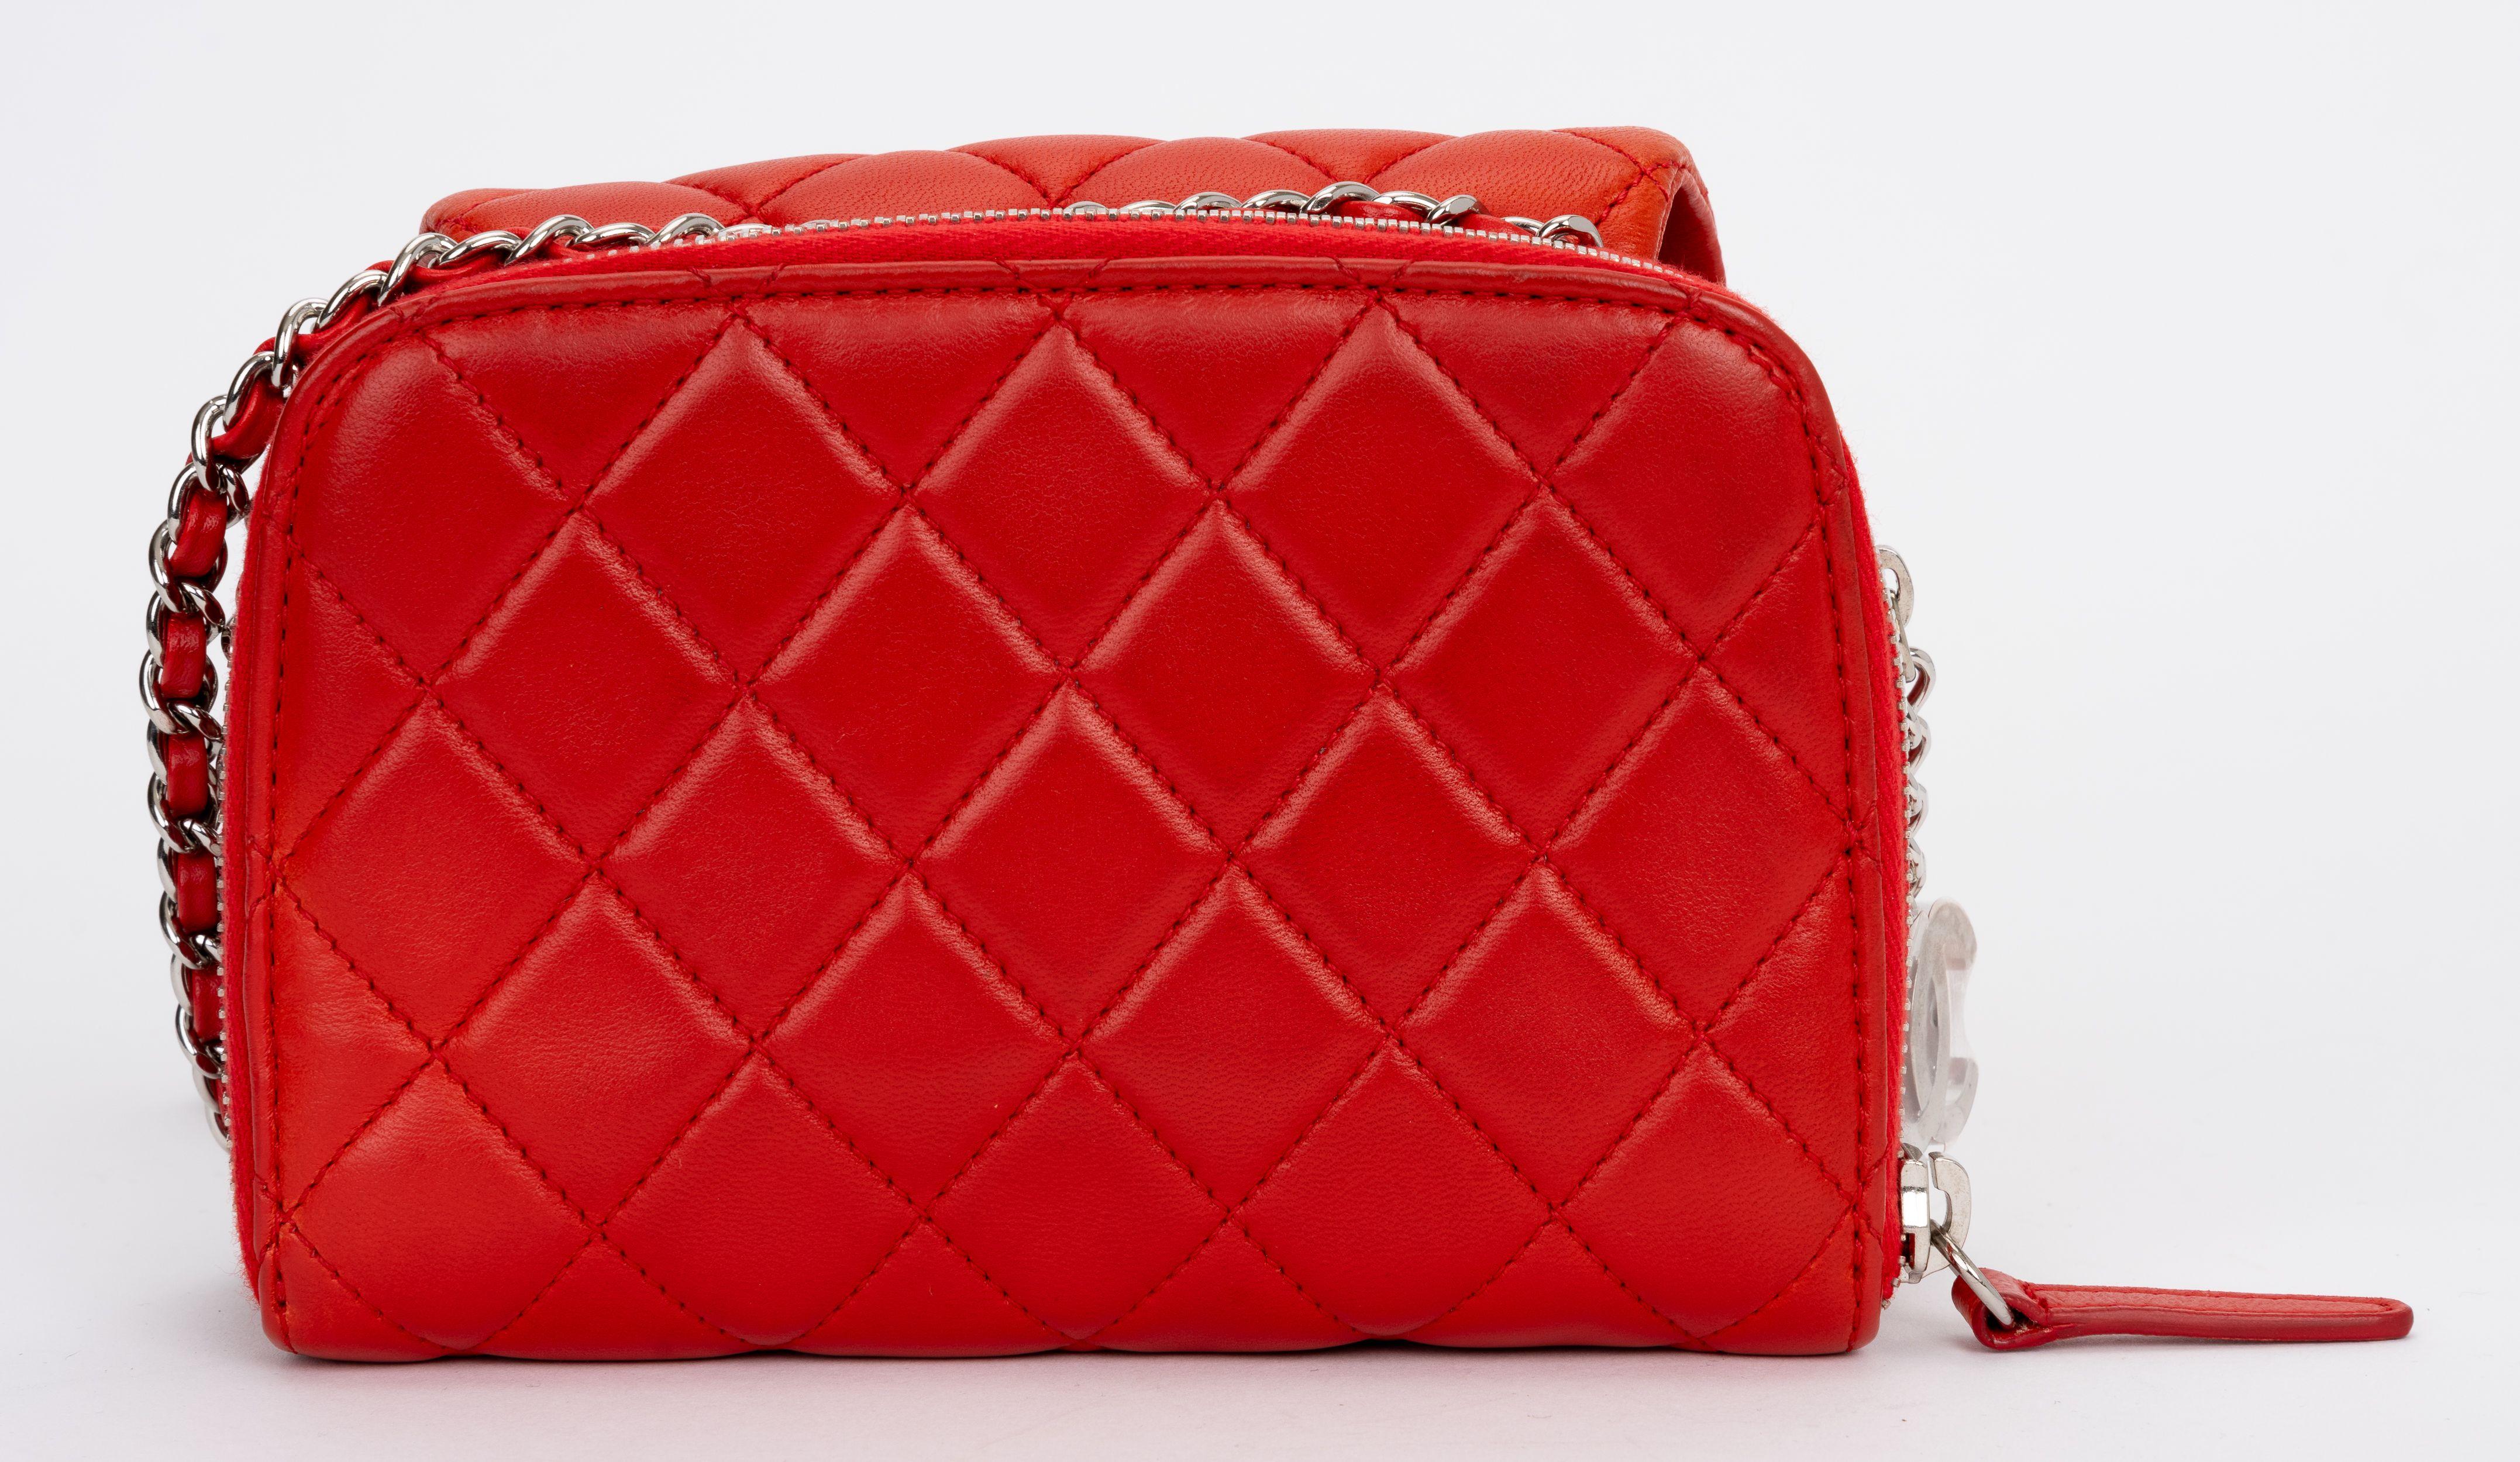 Women's Chanel Red Leather Crossbody Flap Bag For Sale